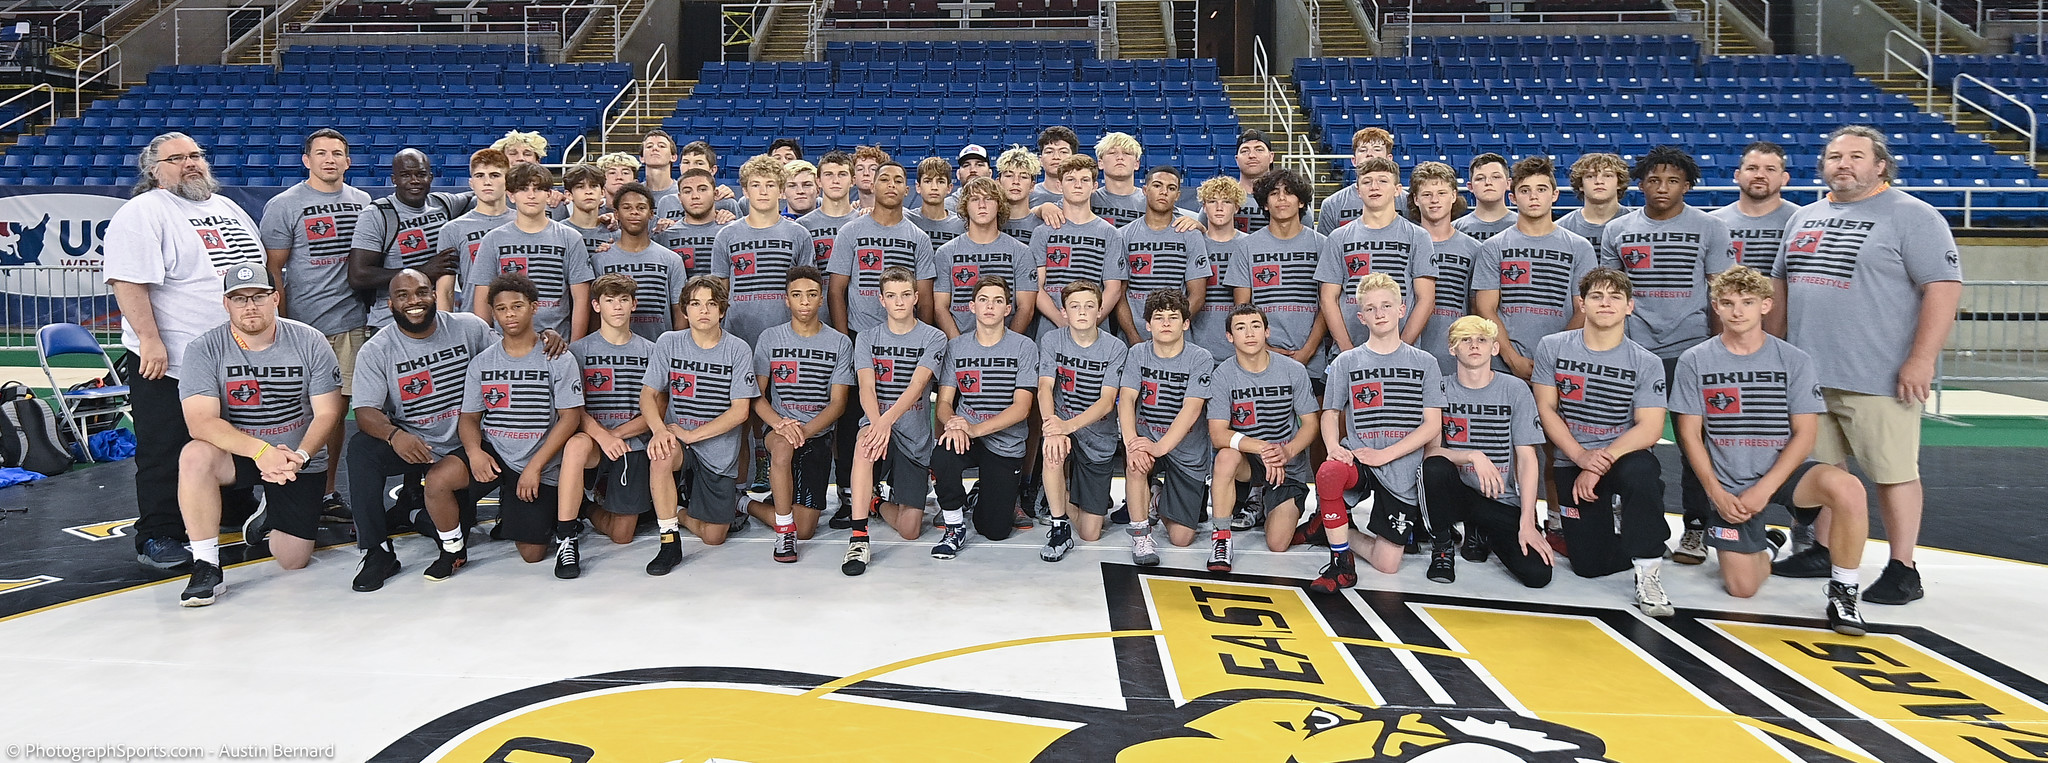 Tulsa to Host Junior National Duals for 2022 and 2023 Owrestle